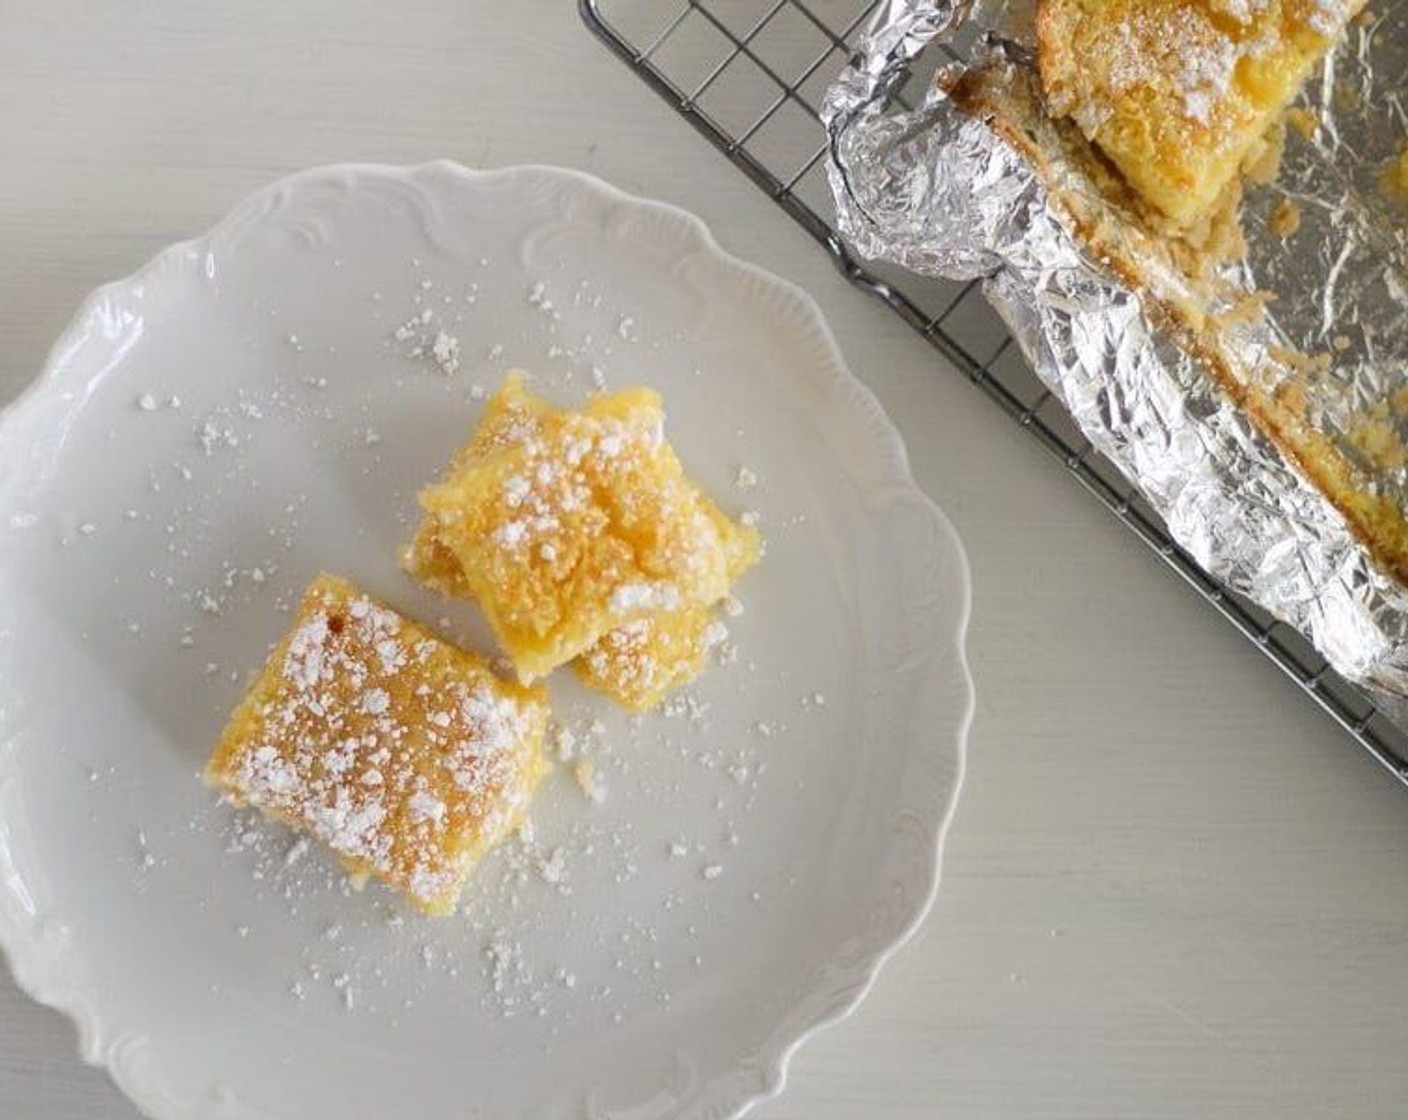 step 8 Remove from the oven and carefully lift the foil and transfer to a wire cooling rack. Let cool completely, sprinkle with powdered sugar if desired, cut and serve. Enjoy!